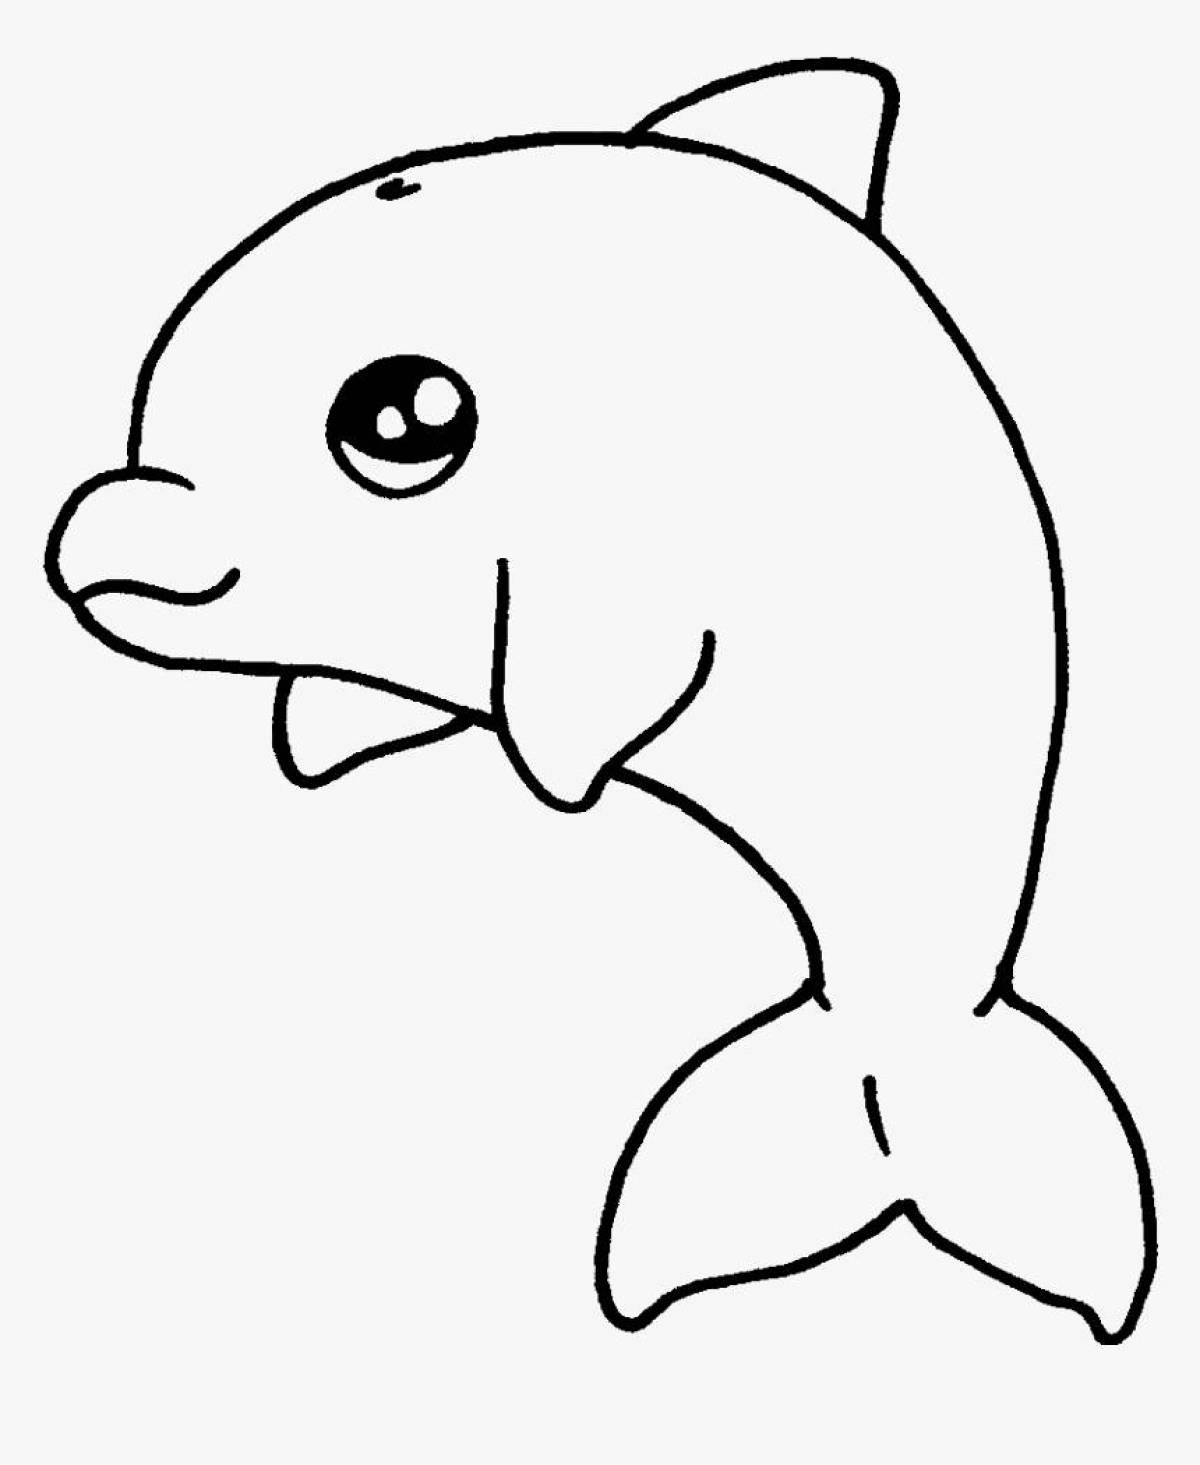 Awesome dolphin coloring pages for kids